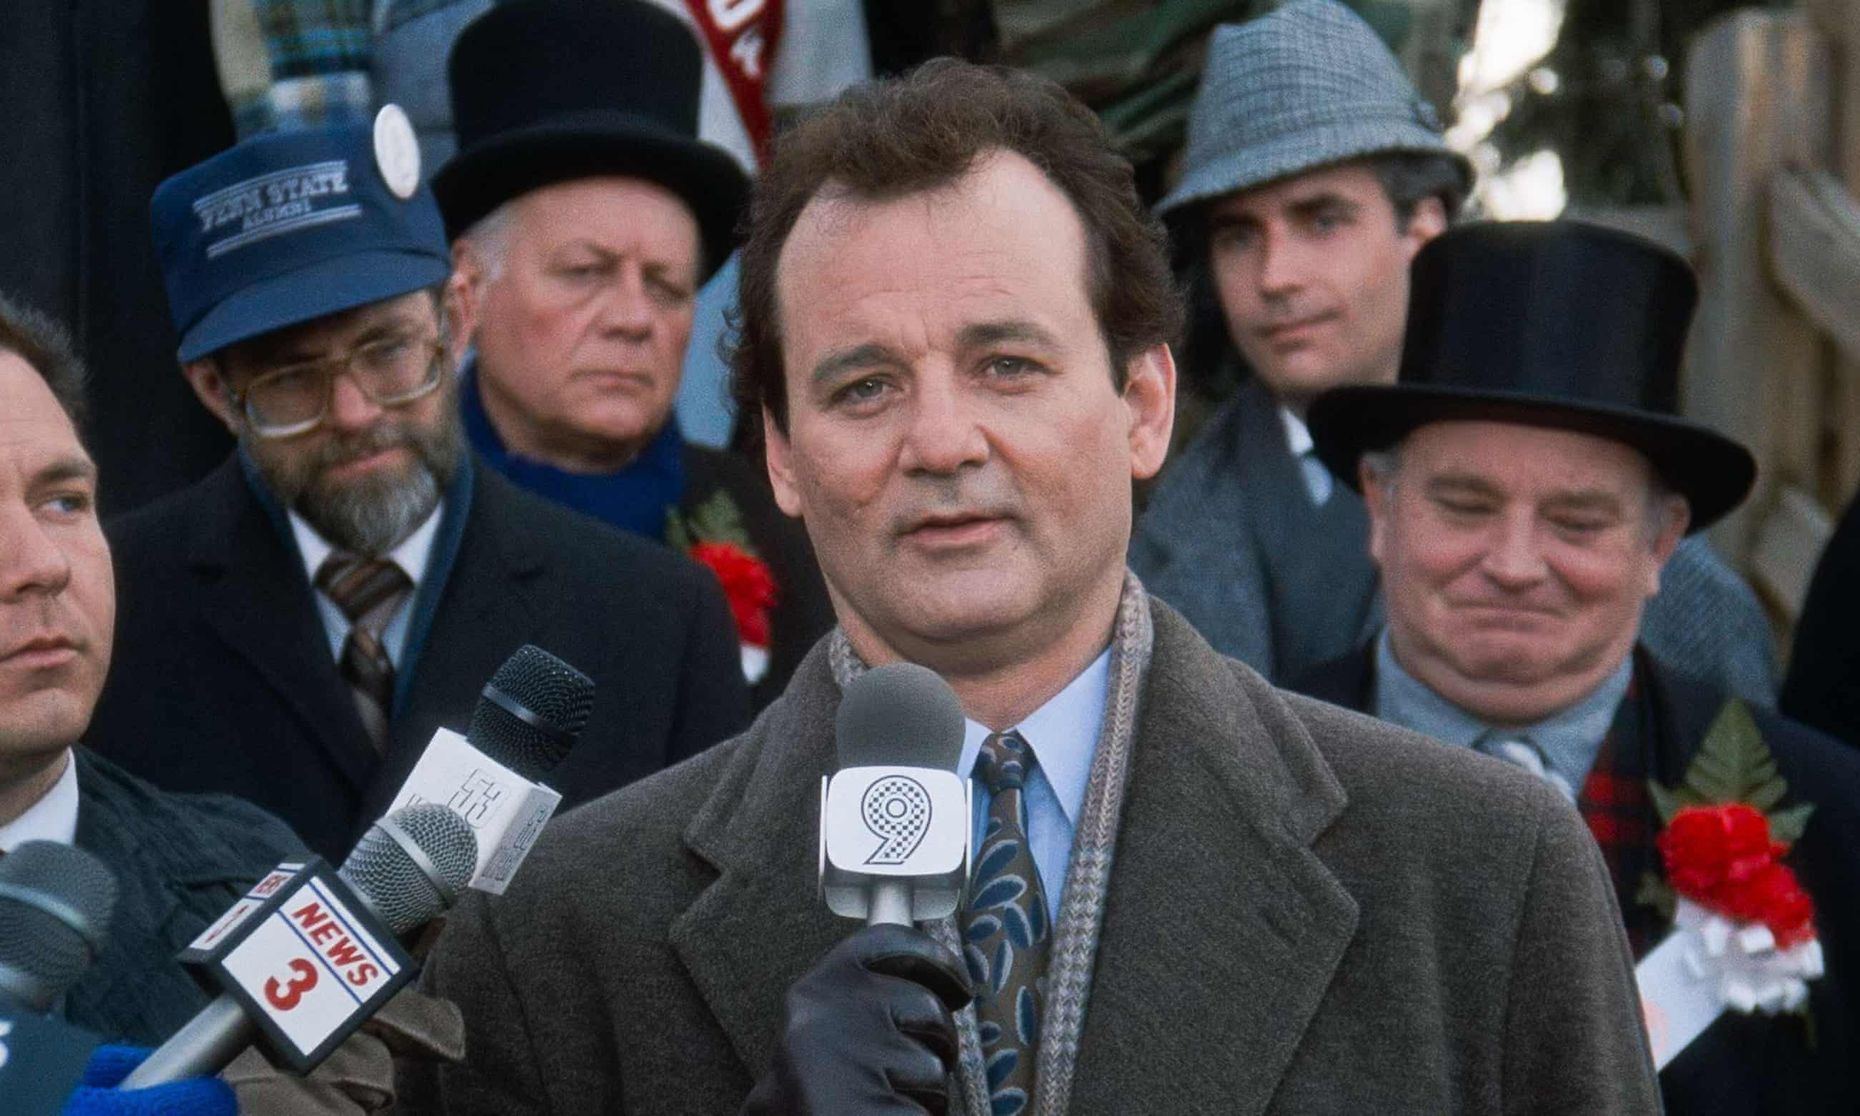 <p>With its simple premise—a cynical and narcissistic weatherman named Phil finds himself trapped in a time loop—<em>Groundhog Day</em>, directed by Harold Ramis, became a classic of American cinema and inspired countless time-travel films, many of which appear on this list. Starring Bill Murray and Andie MacDowell, the movie has been called <a href="https://www.rottentomatoes.com/m/groundhog_day">“smart, sweet and inventive”</a> and an incredible exploration of <a href="https://www.rogerebert.com/reviews/great-movie-groundhog-day-1993">human growth</a>. Critics also agree that Murray’s sublime performance was essential to the film’s success.</p>